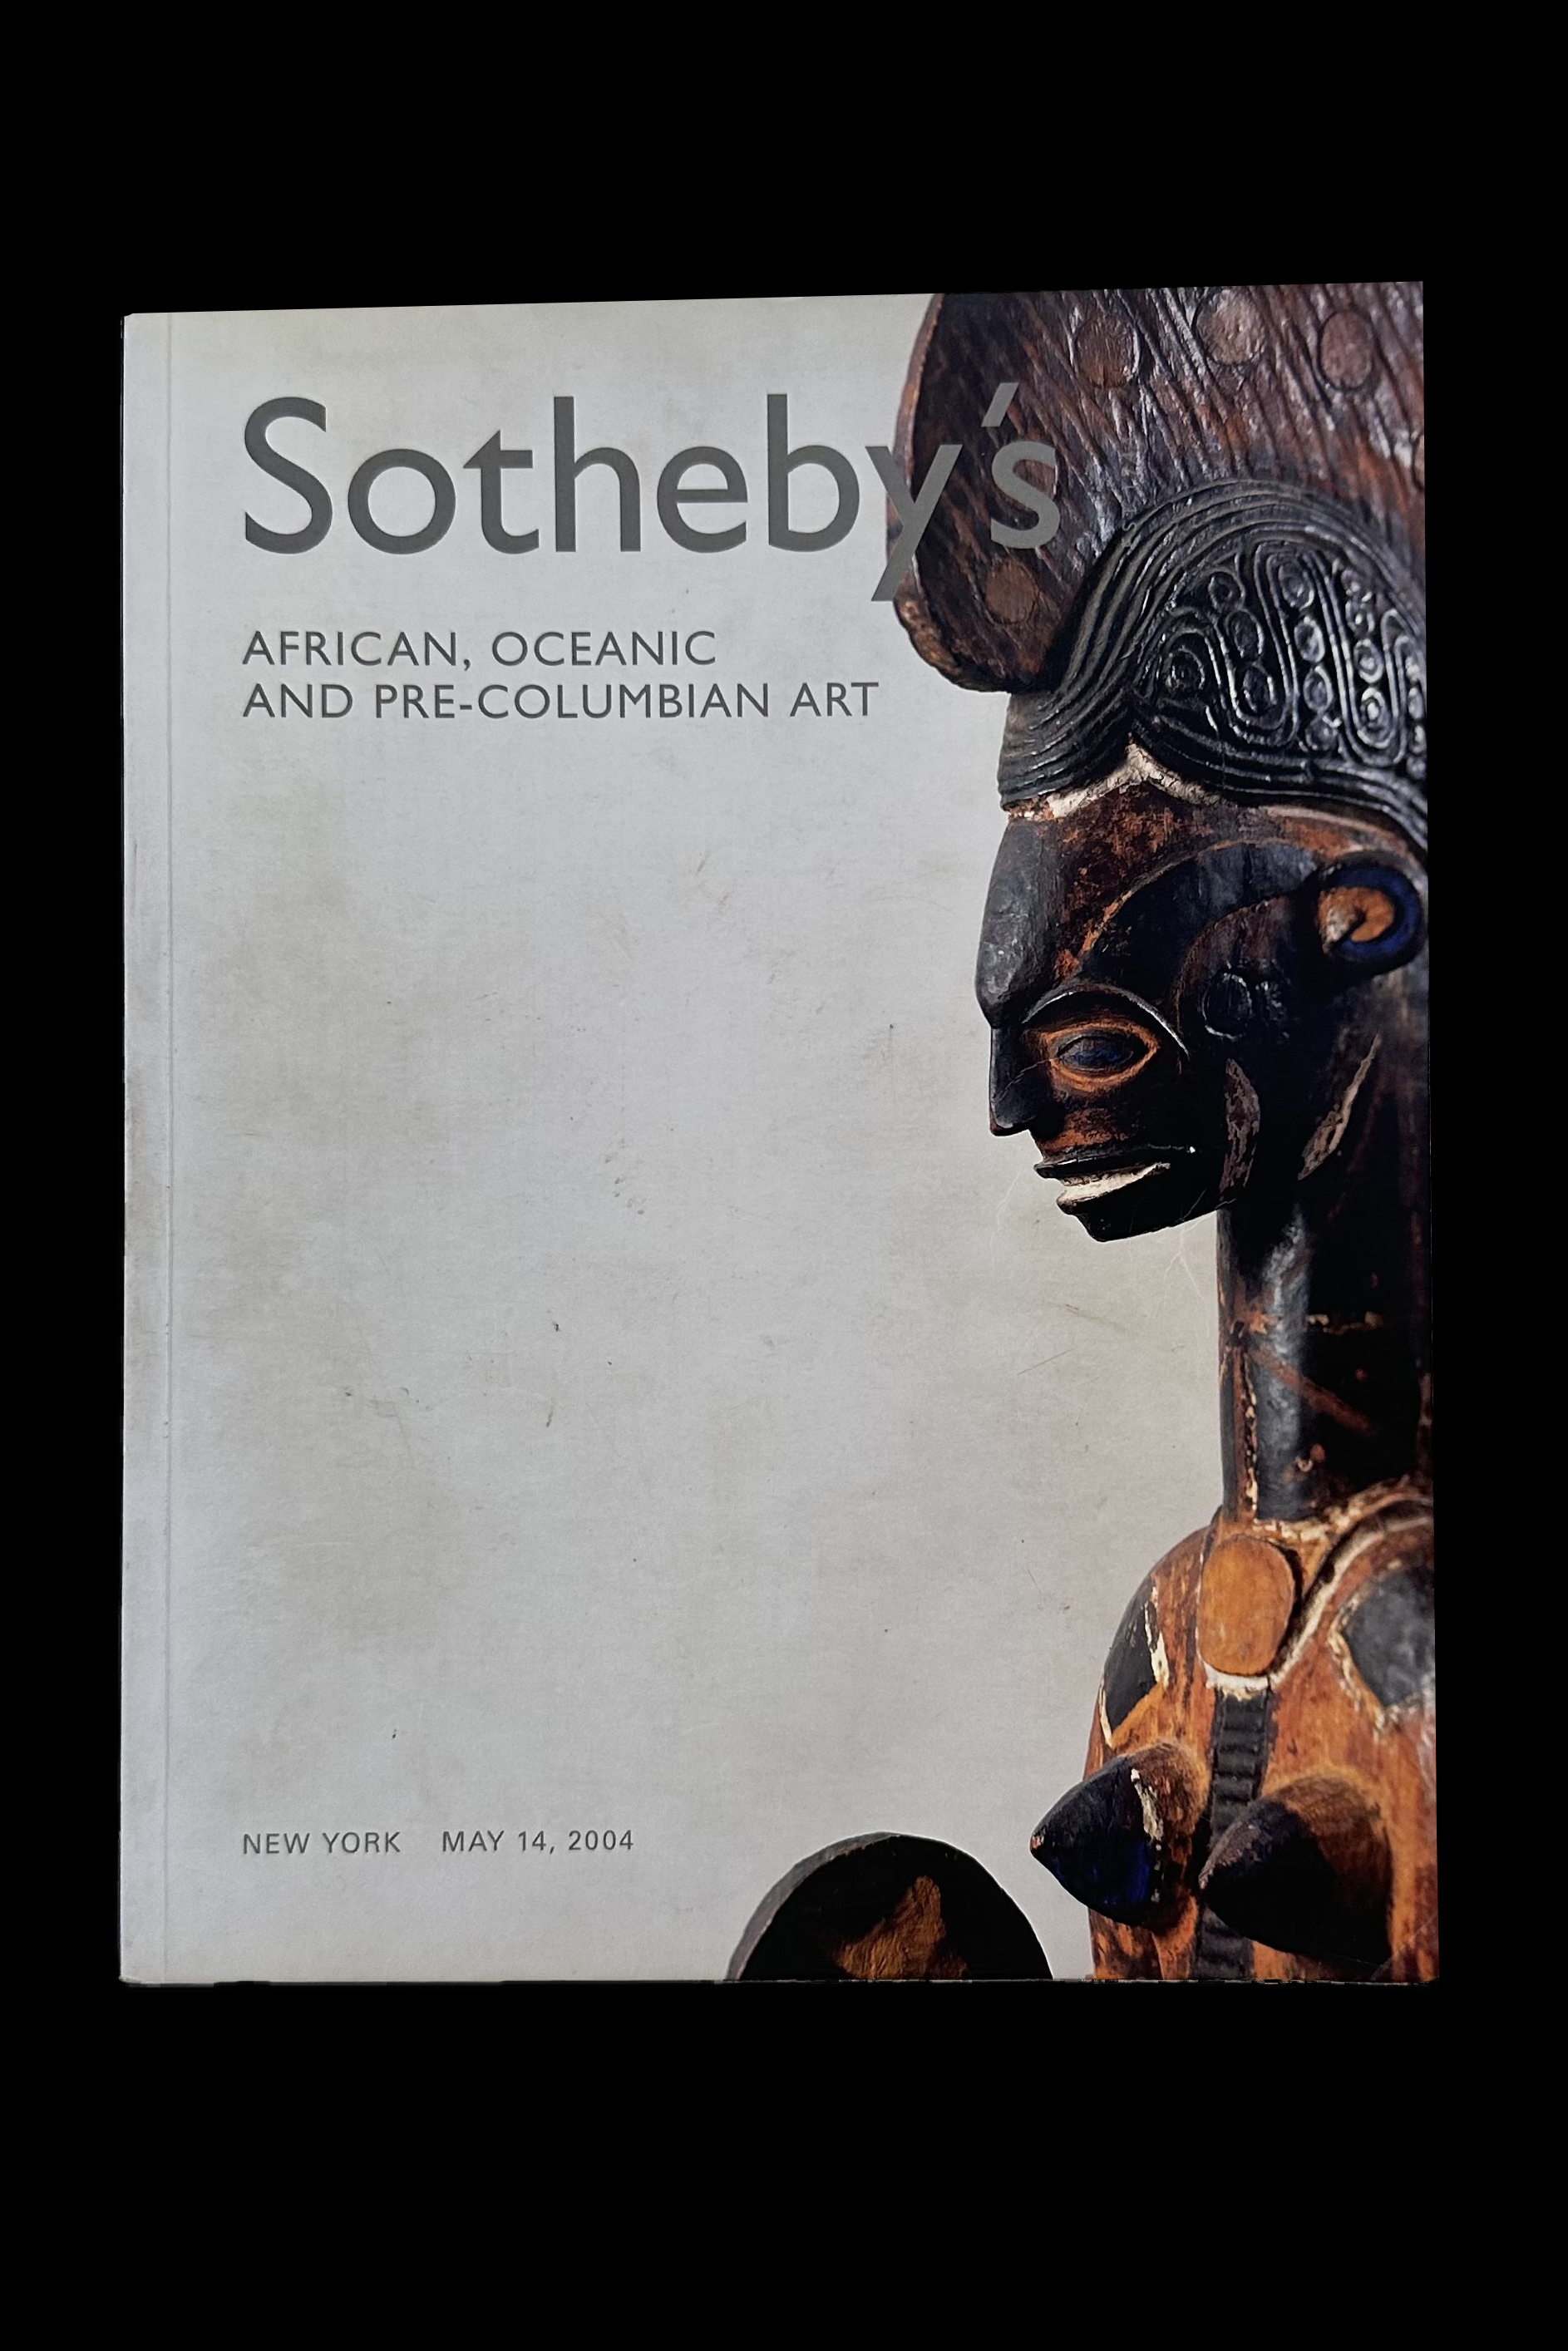 Sotheby's - African, Oceanic and Pre-Columbian Art - New York, May 2004